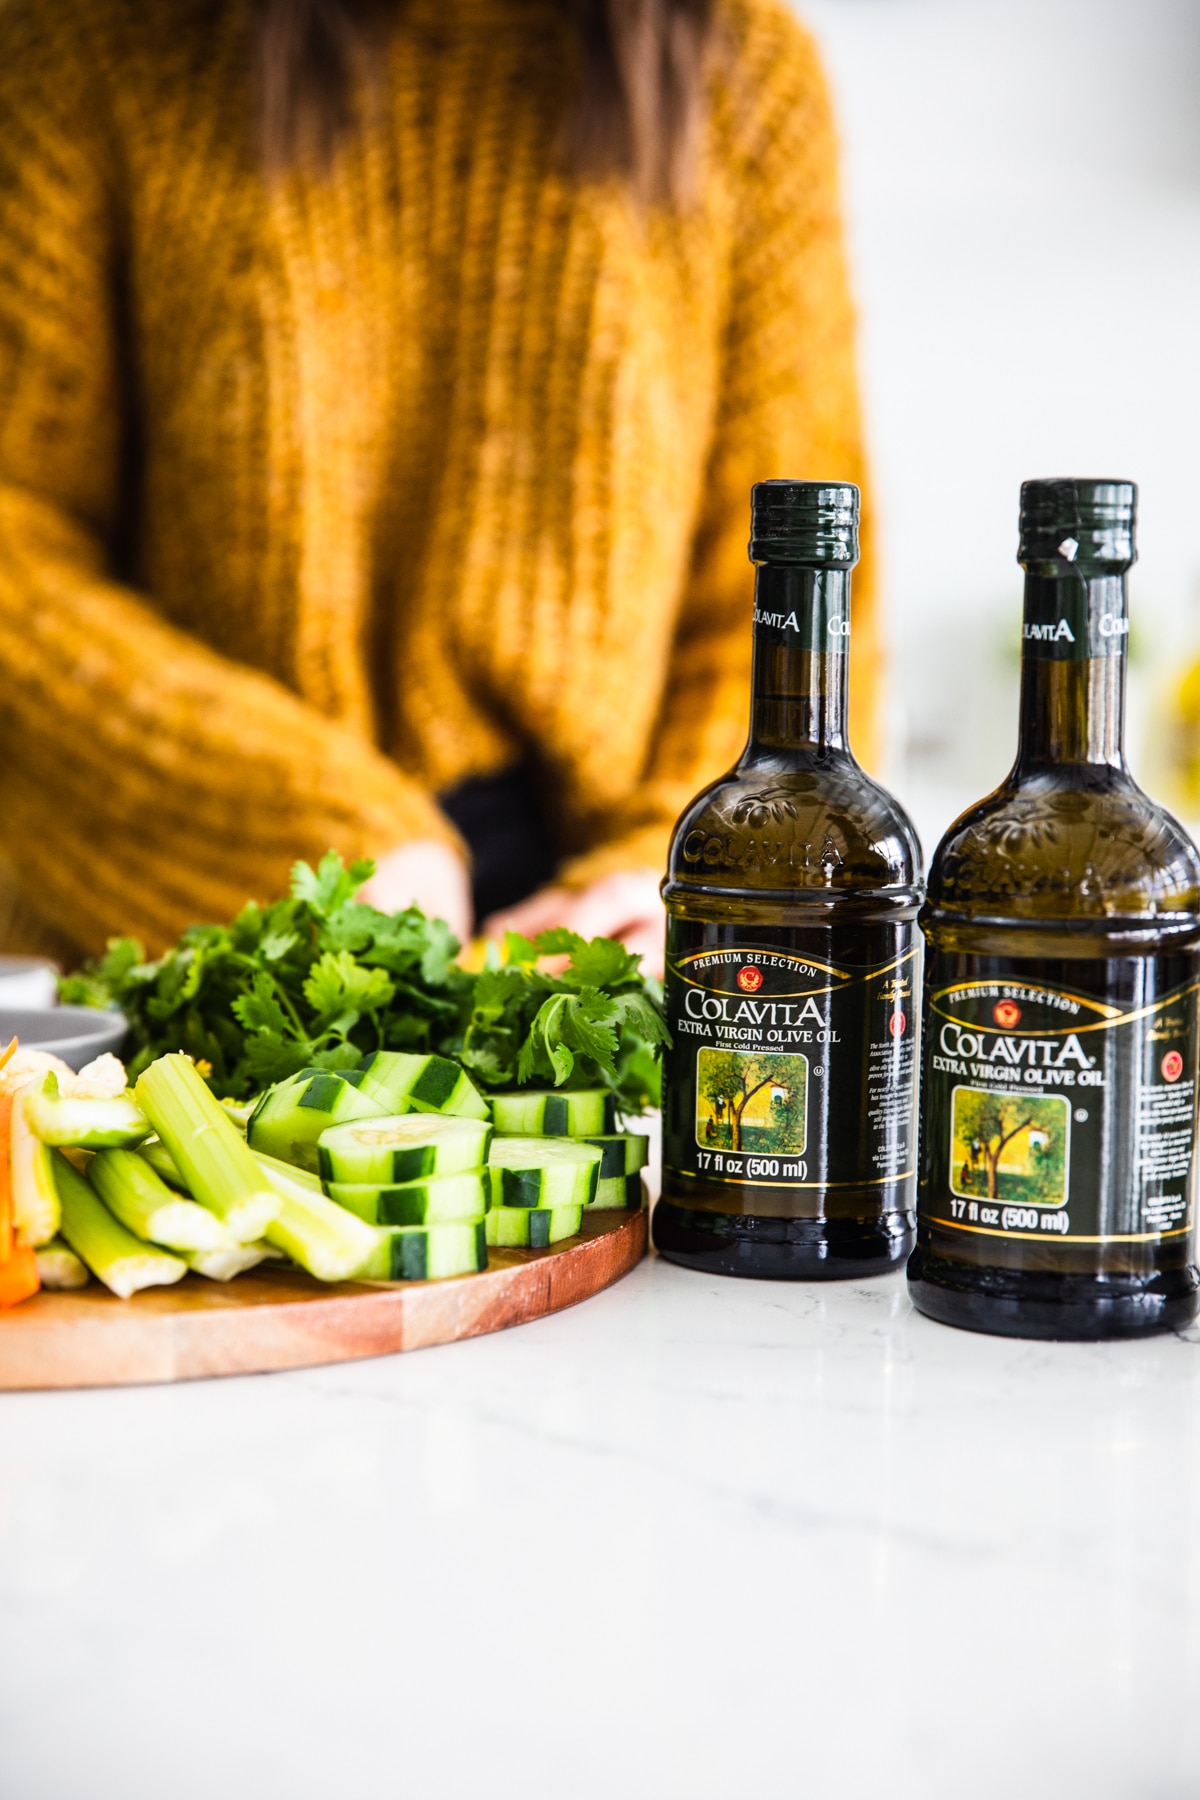 2 dark glass bottles of olive oil on counter next to wooden cutting board filled with fresh cut vegetables.